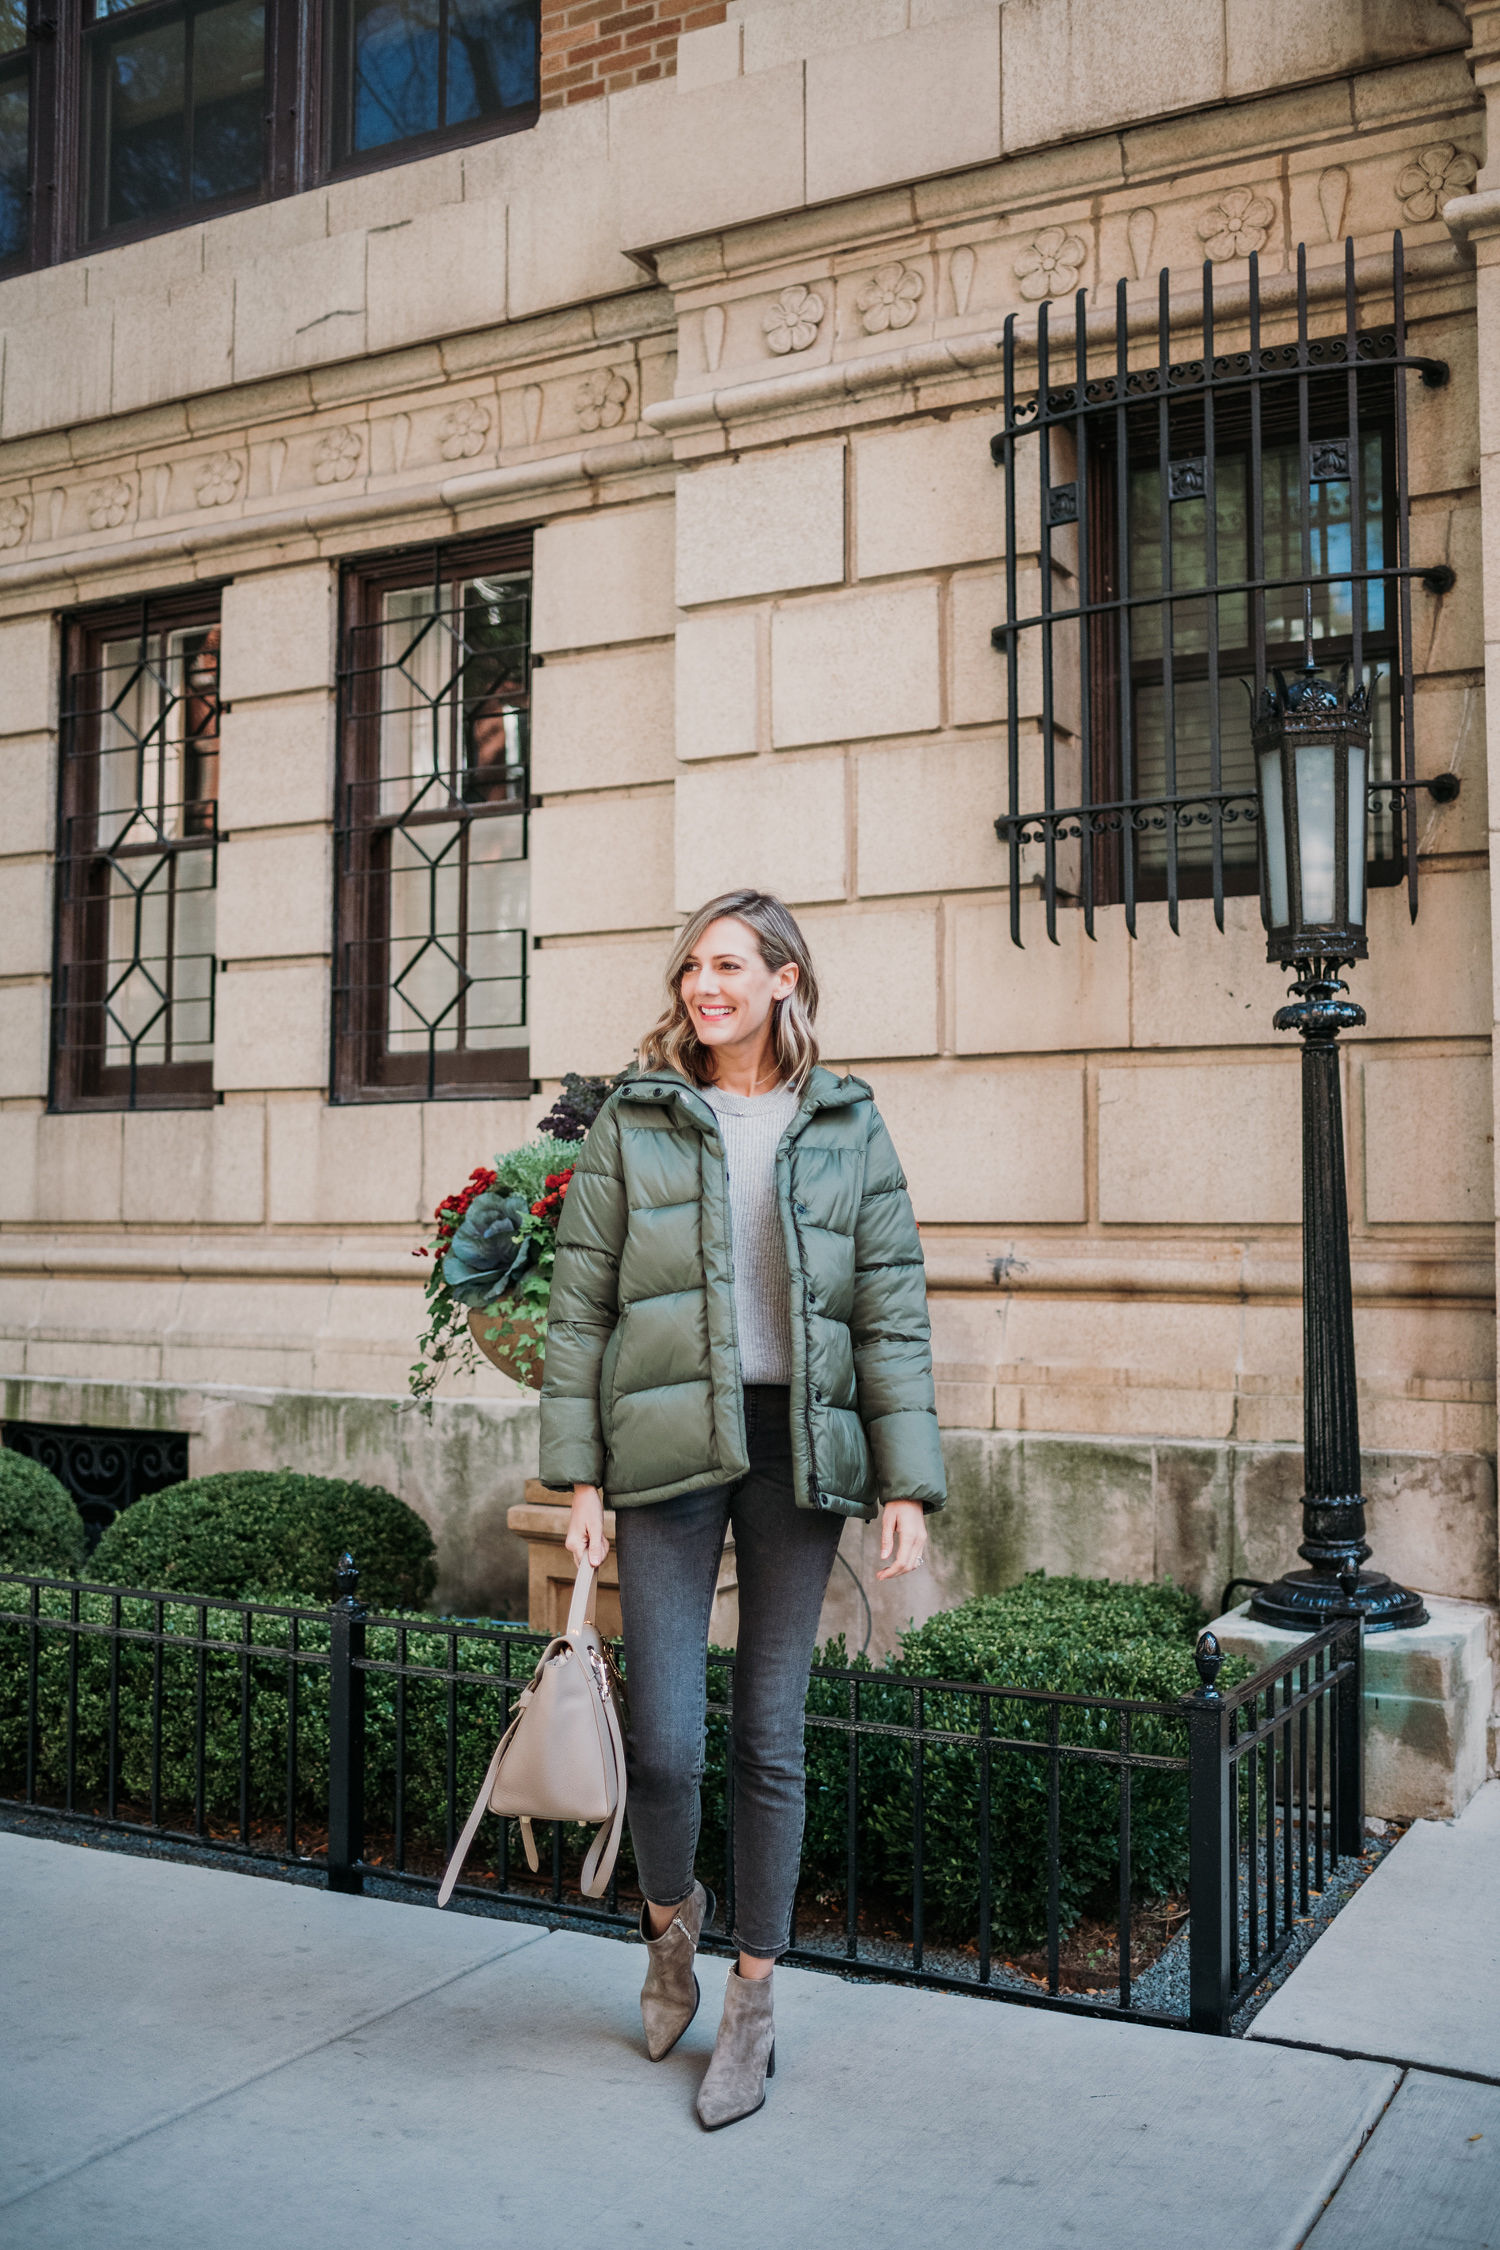 everlane renew how to style a puffer coat